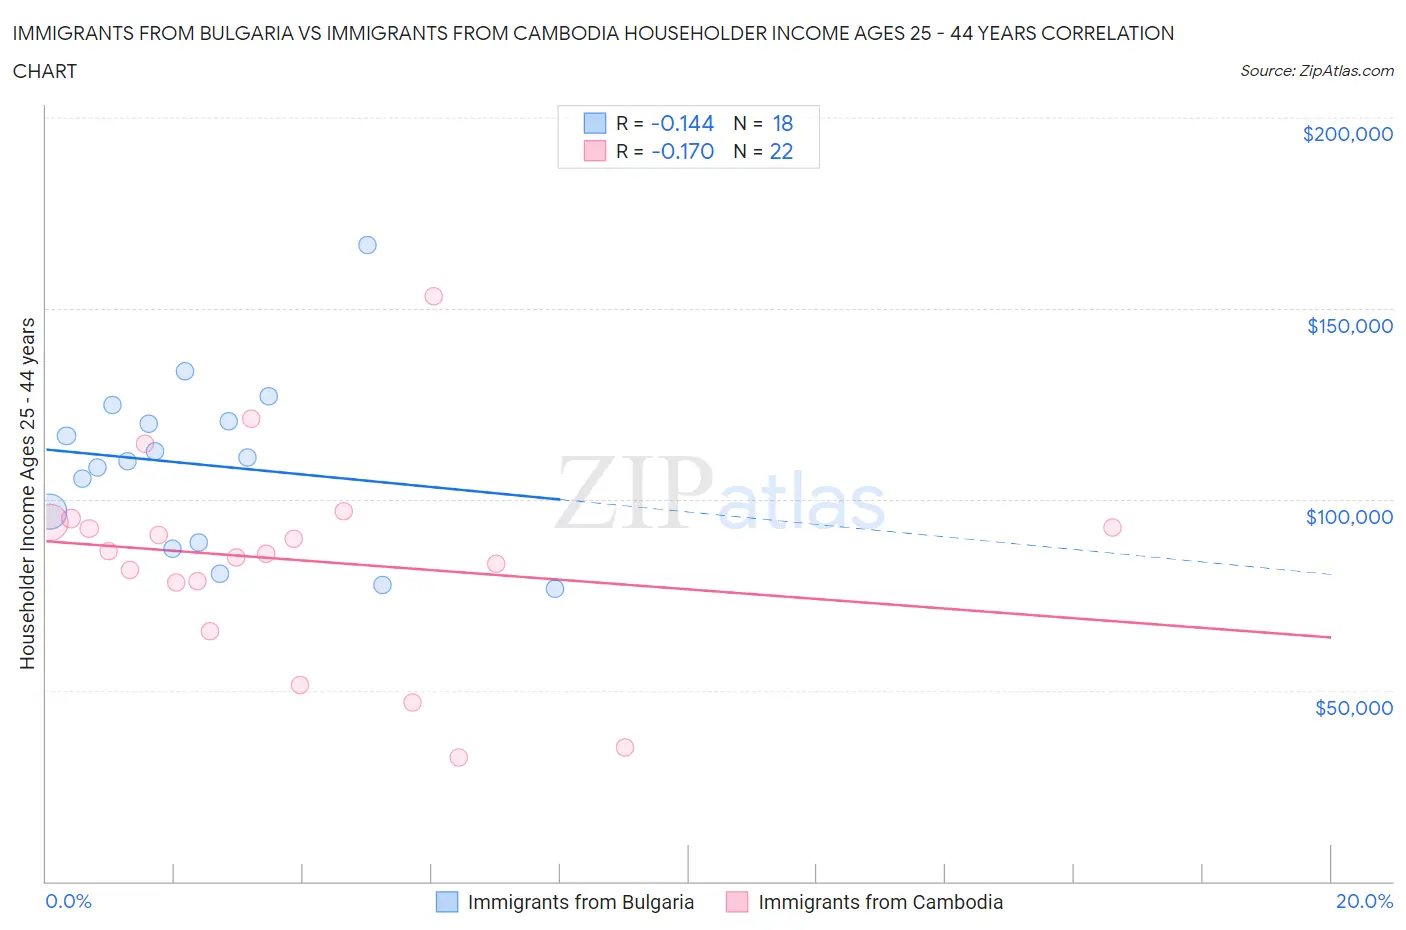 Immigrants from Bulgaria vs Immigrants from Cambodia Householder Income Ages 25 - 44 years